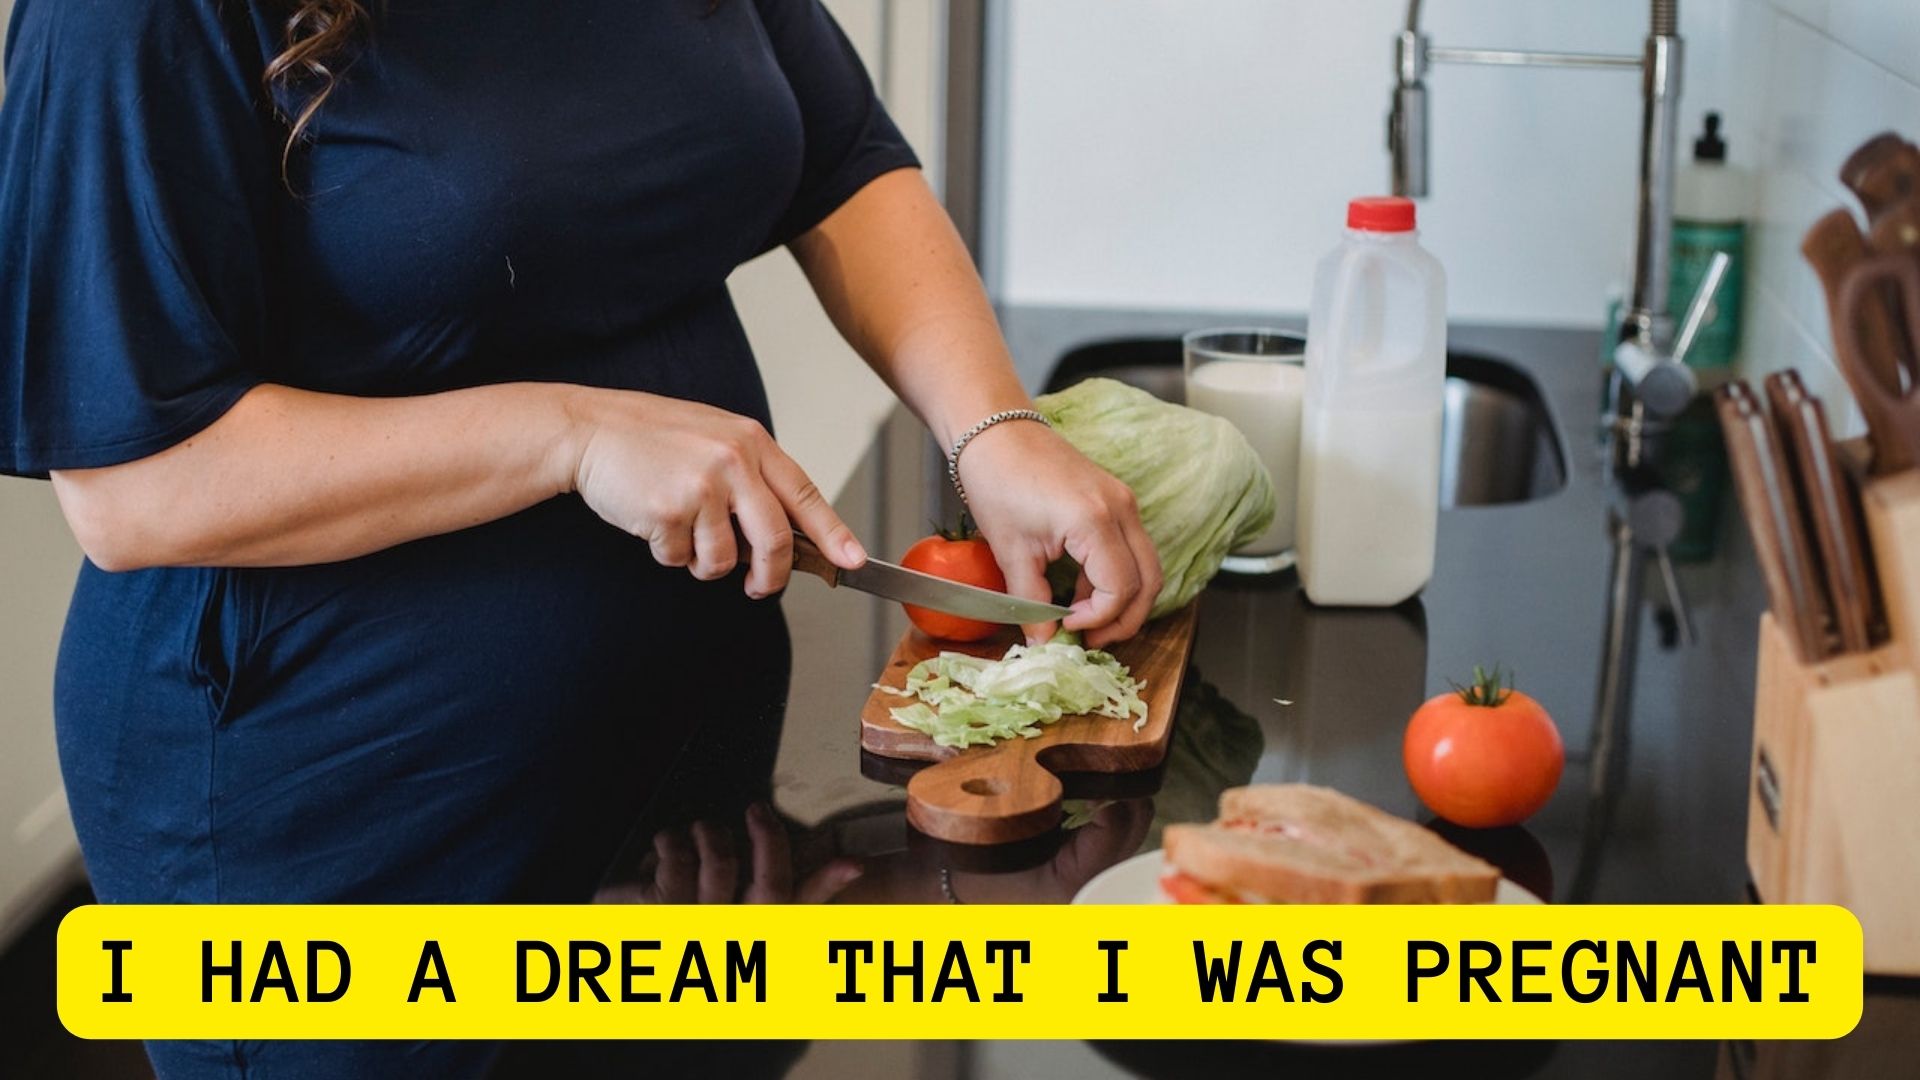 I Had A Dream That I Was Pregnant - What Does It Mean?